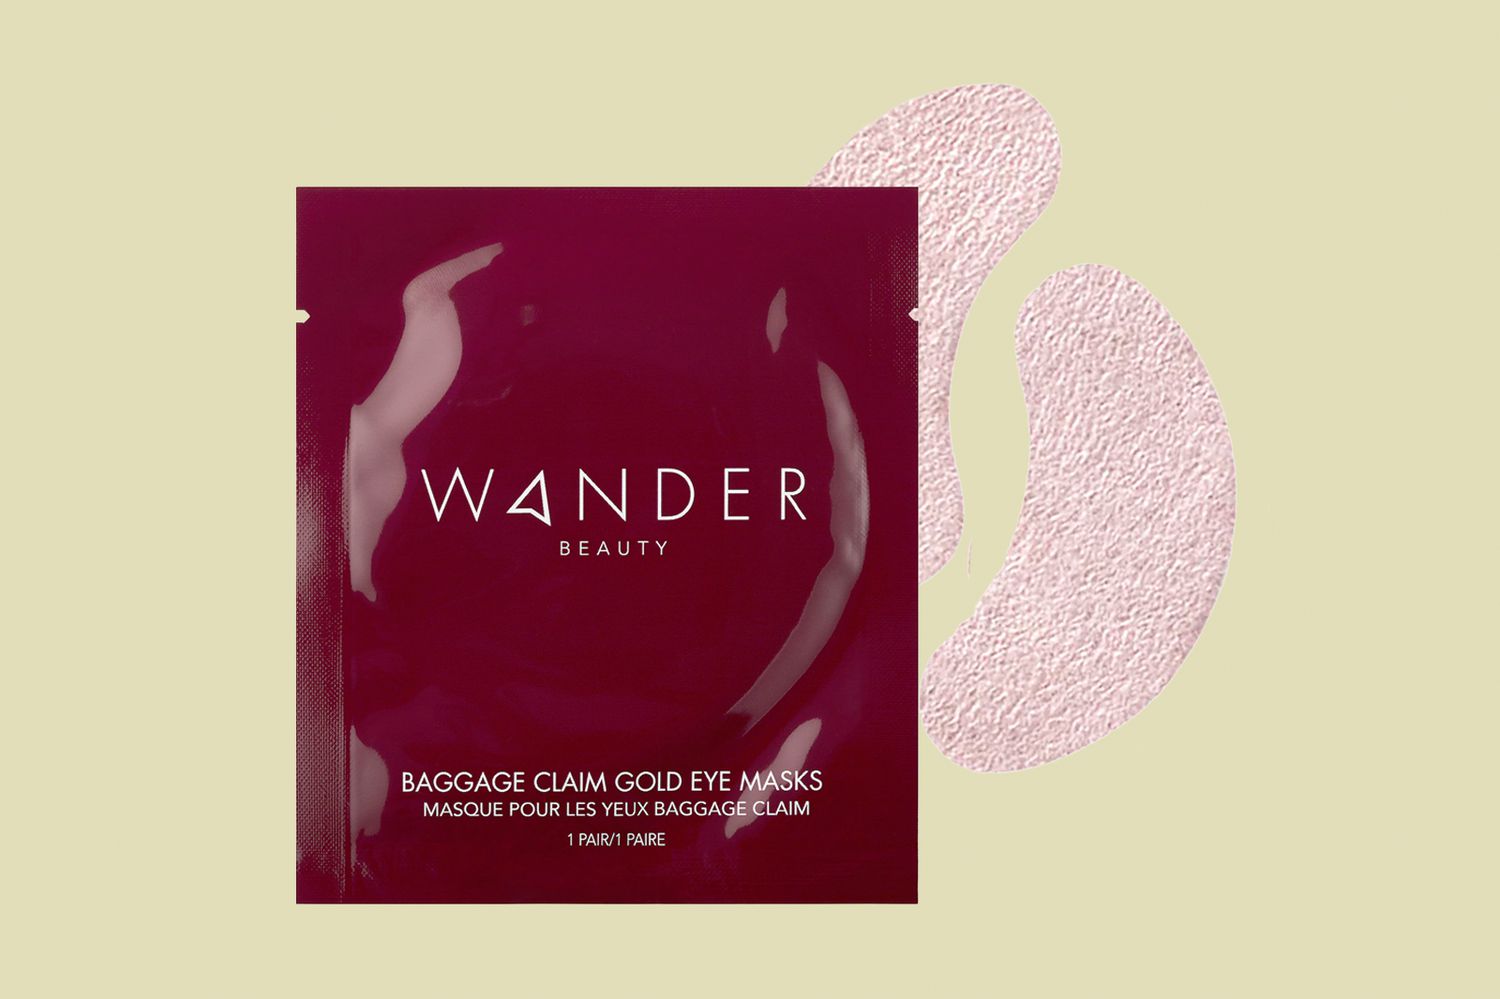 Wander Beauty packet and eye masks on solid background